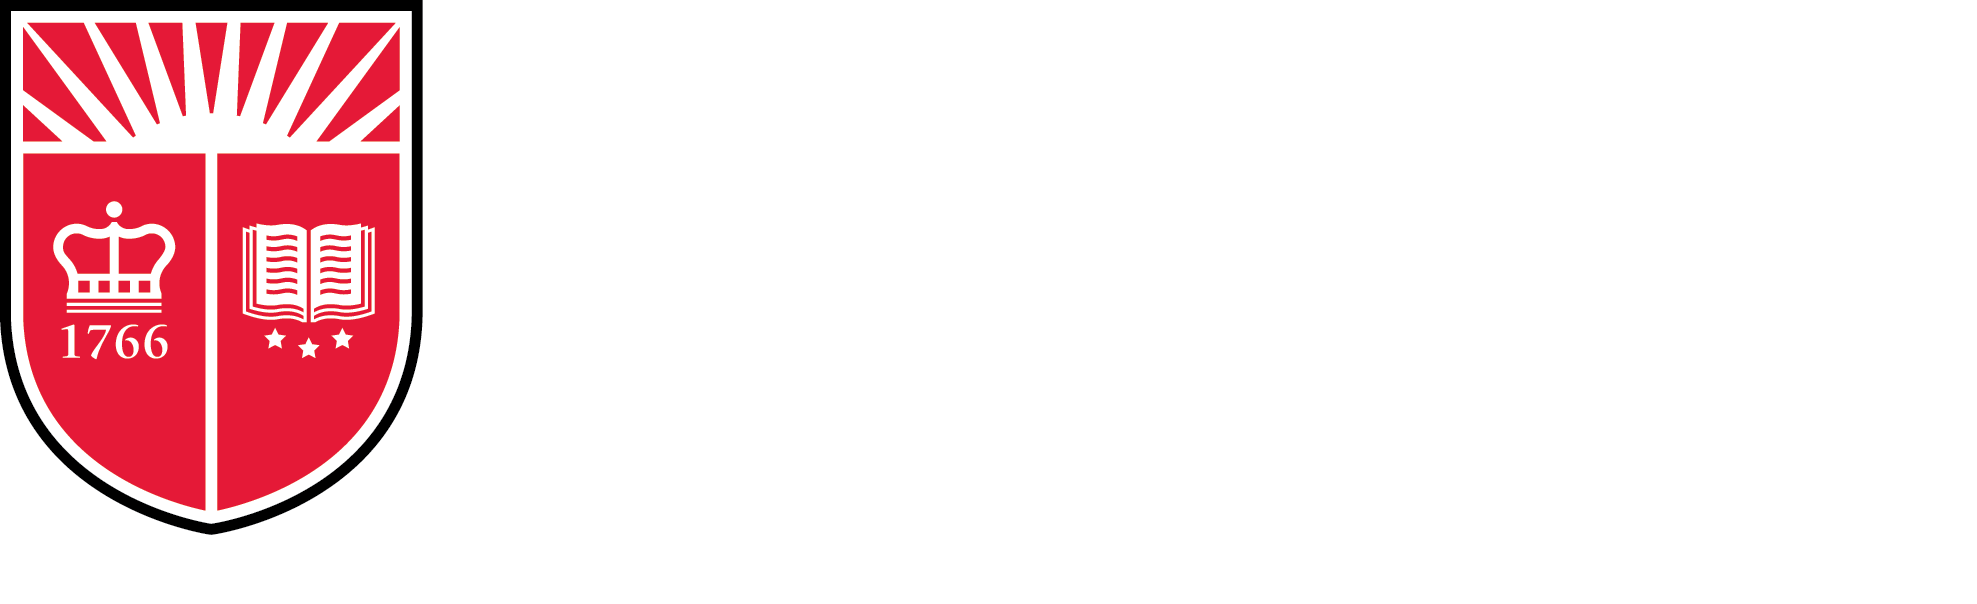 Visual Identity and Branding Resources - Rutgers School of Nursing For Rutgers Powerpoint Template